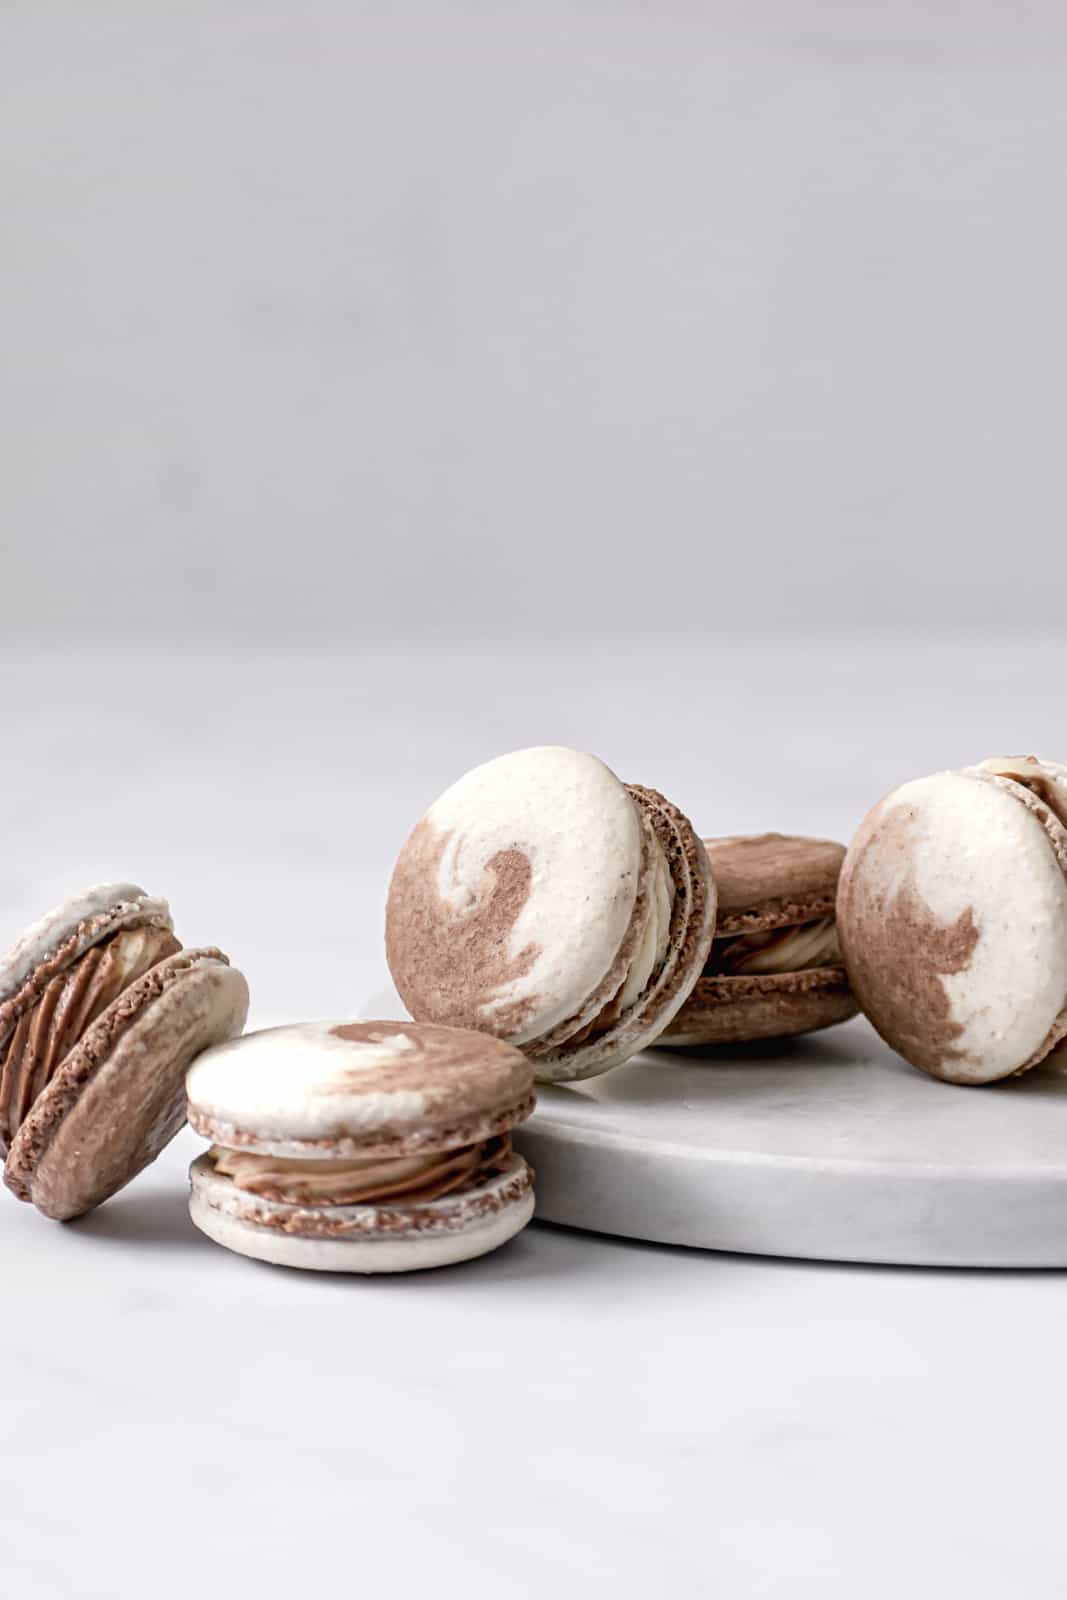 Chocolate & Vanilla Swirled Macarons leaned up against each other on marble.